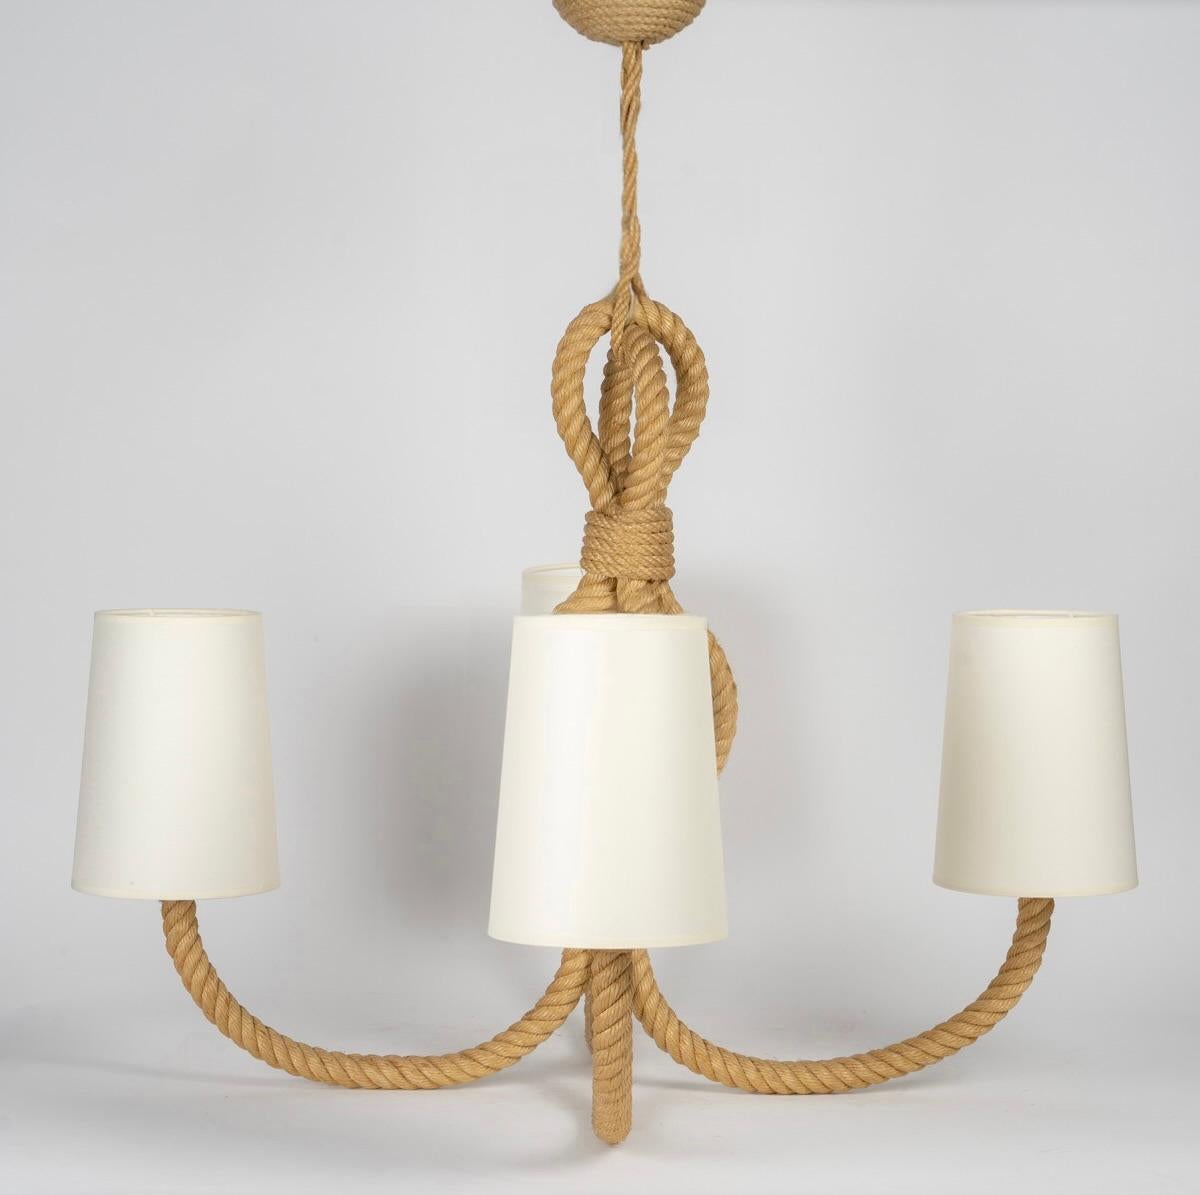  1950 Large Rope Chandelier by Adrien Audoux & Frida Minet For Sale 2